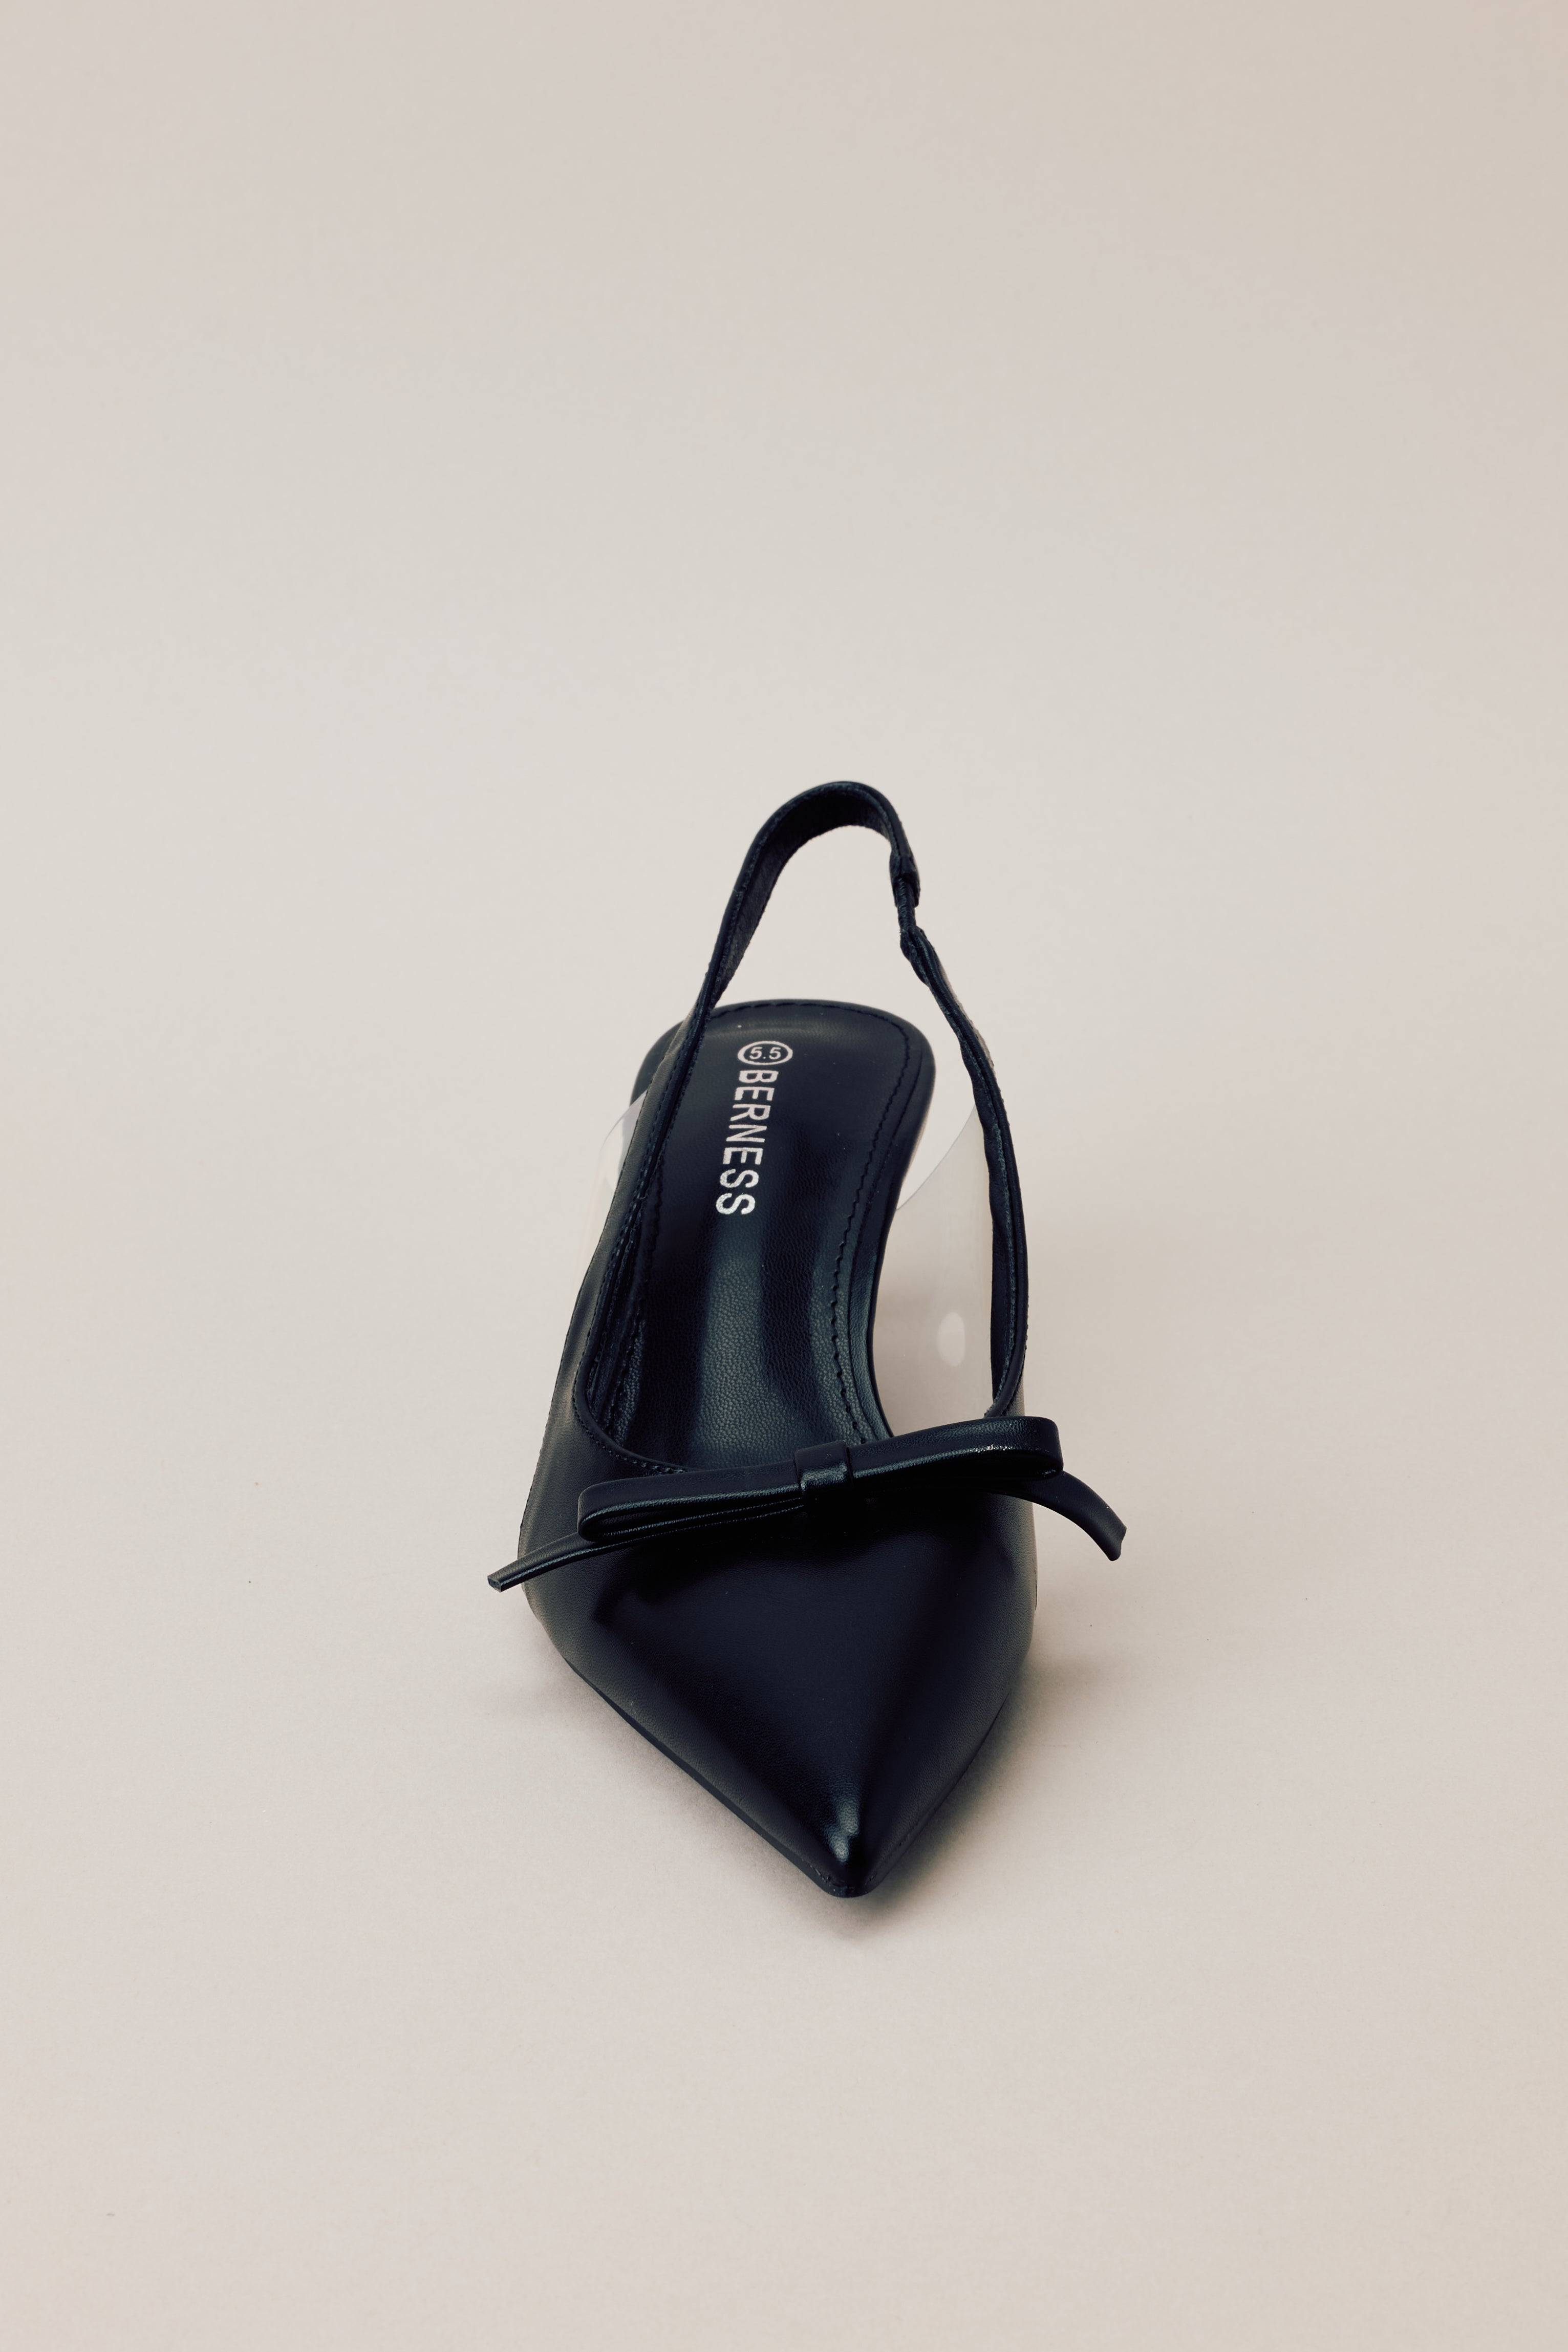 Front view of black kitten heels featuring a pointed closed toe, delicate bow detailing, a strap around the back of the foot, clear siding for extra support, and an extremely short heel.